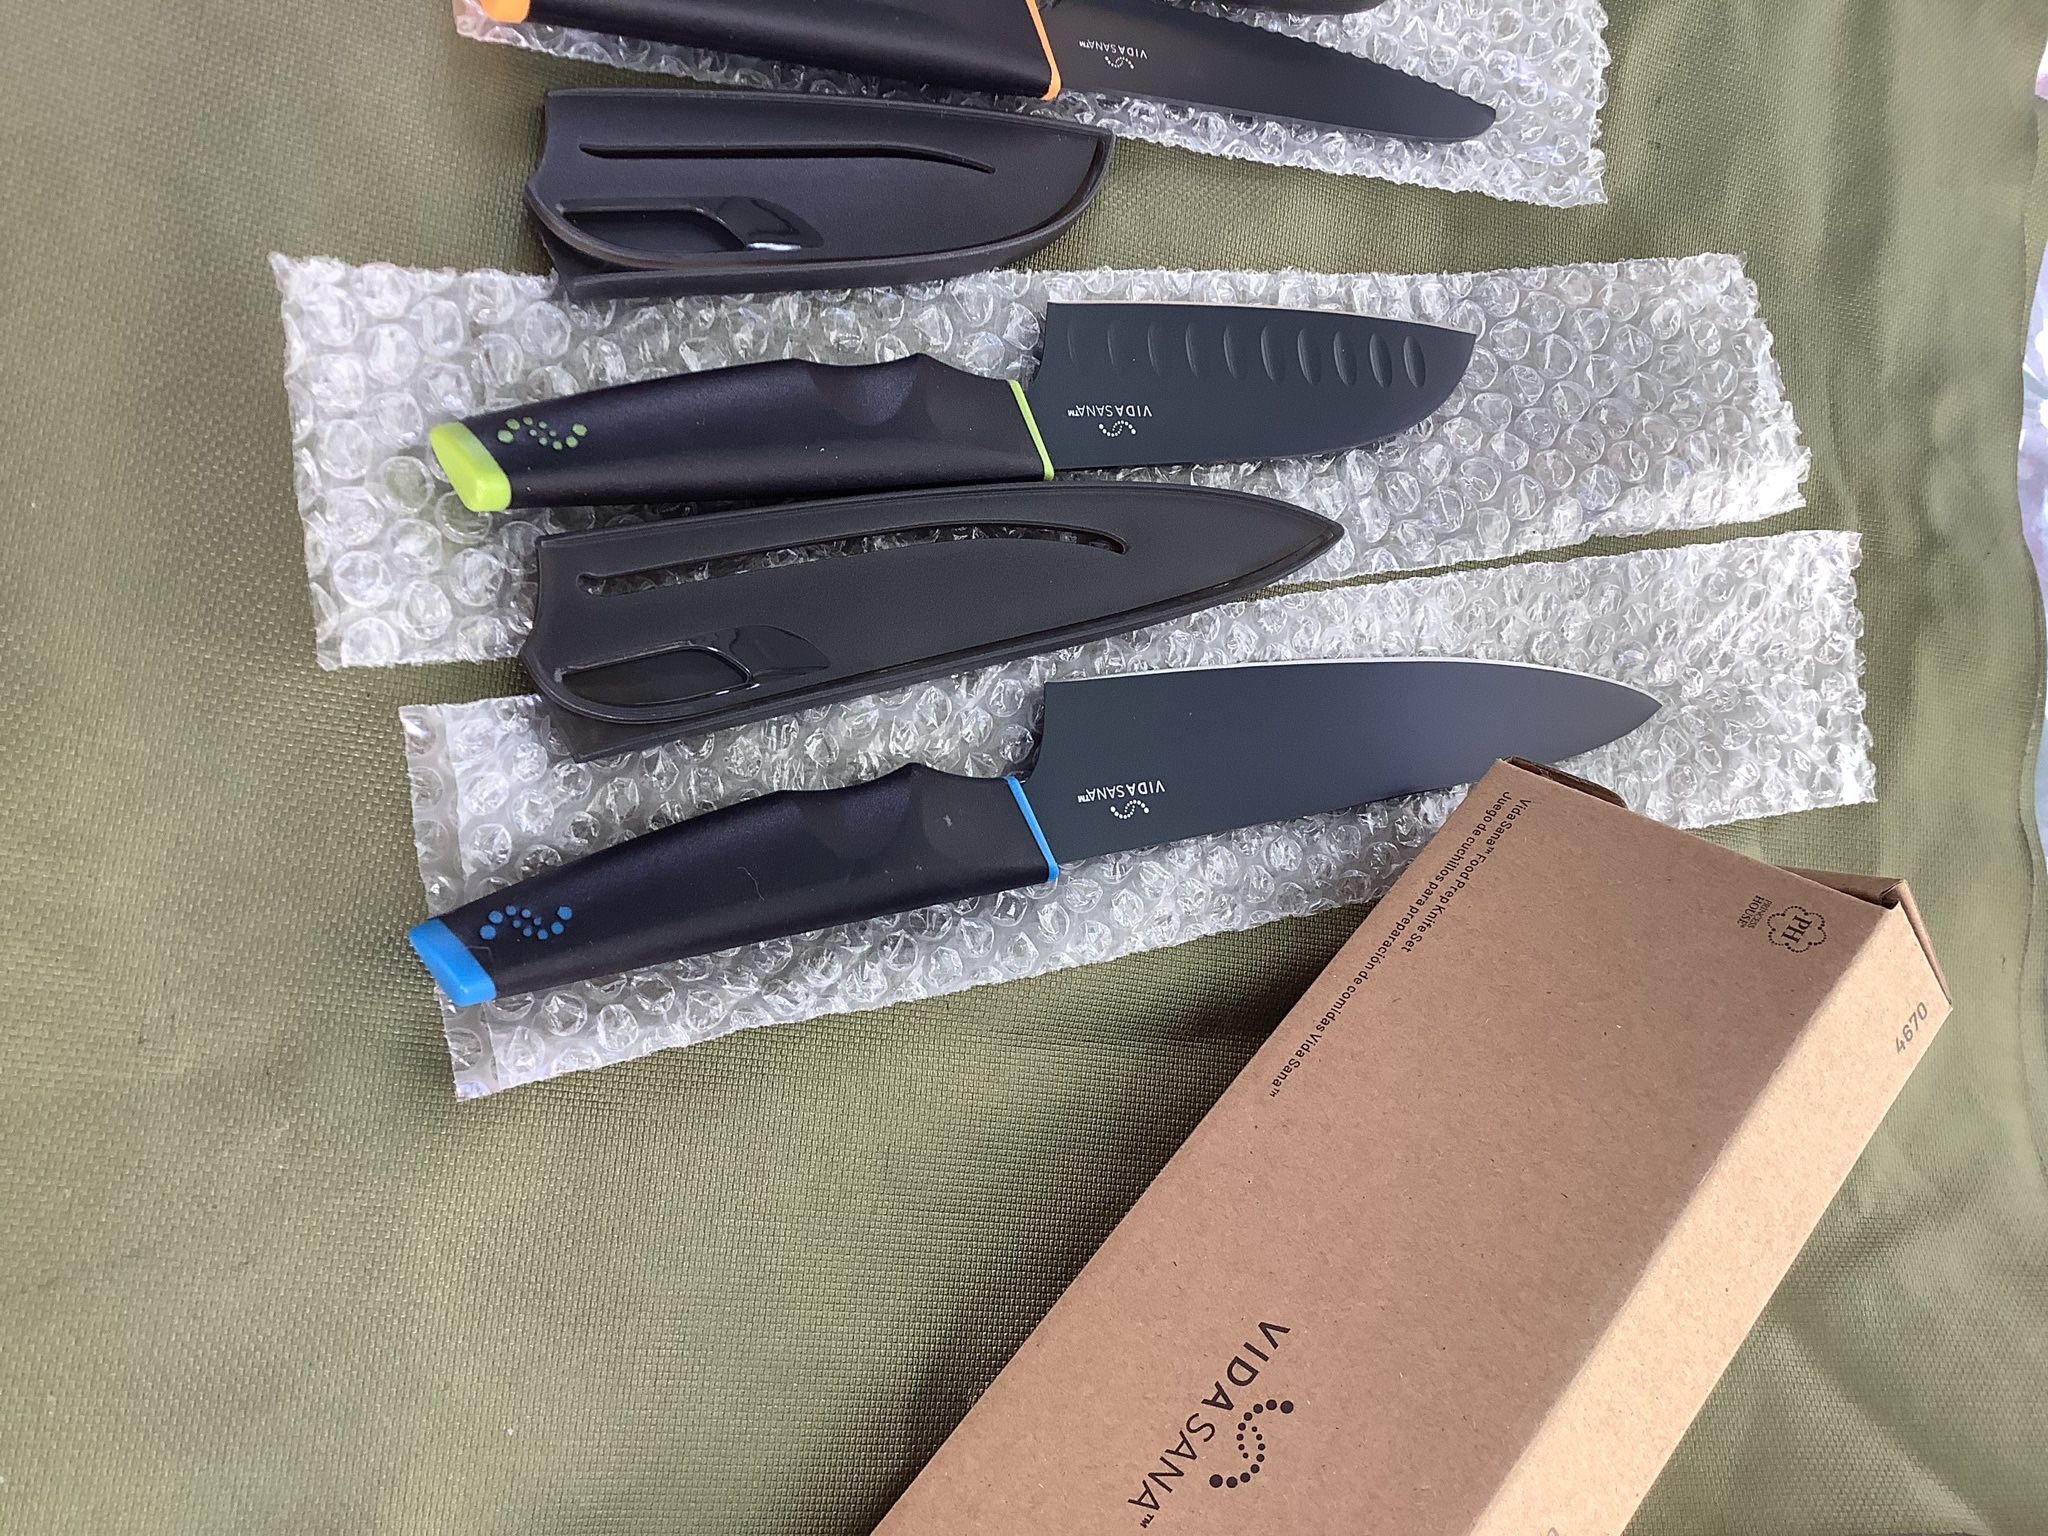 Master Maison Knife Set for Sale in Arrowhed Farm, CA - OfferUp